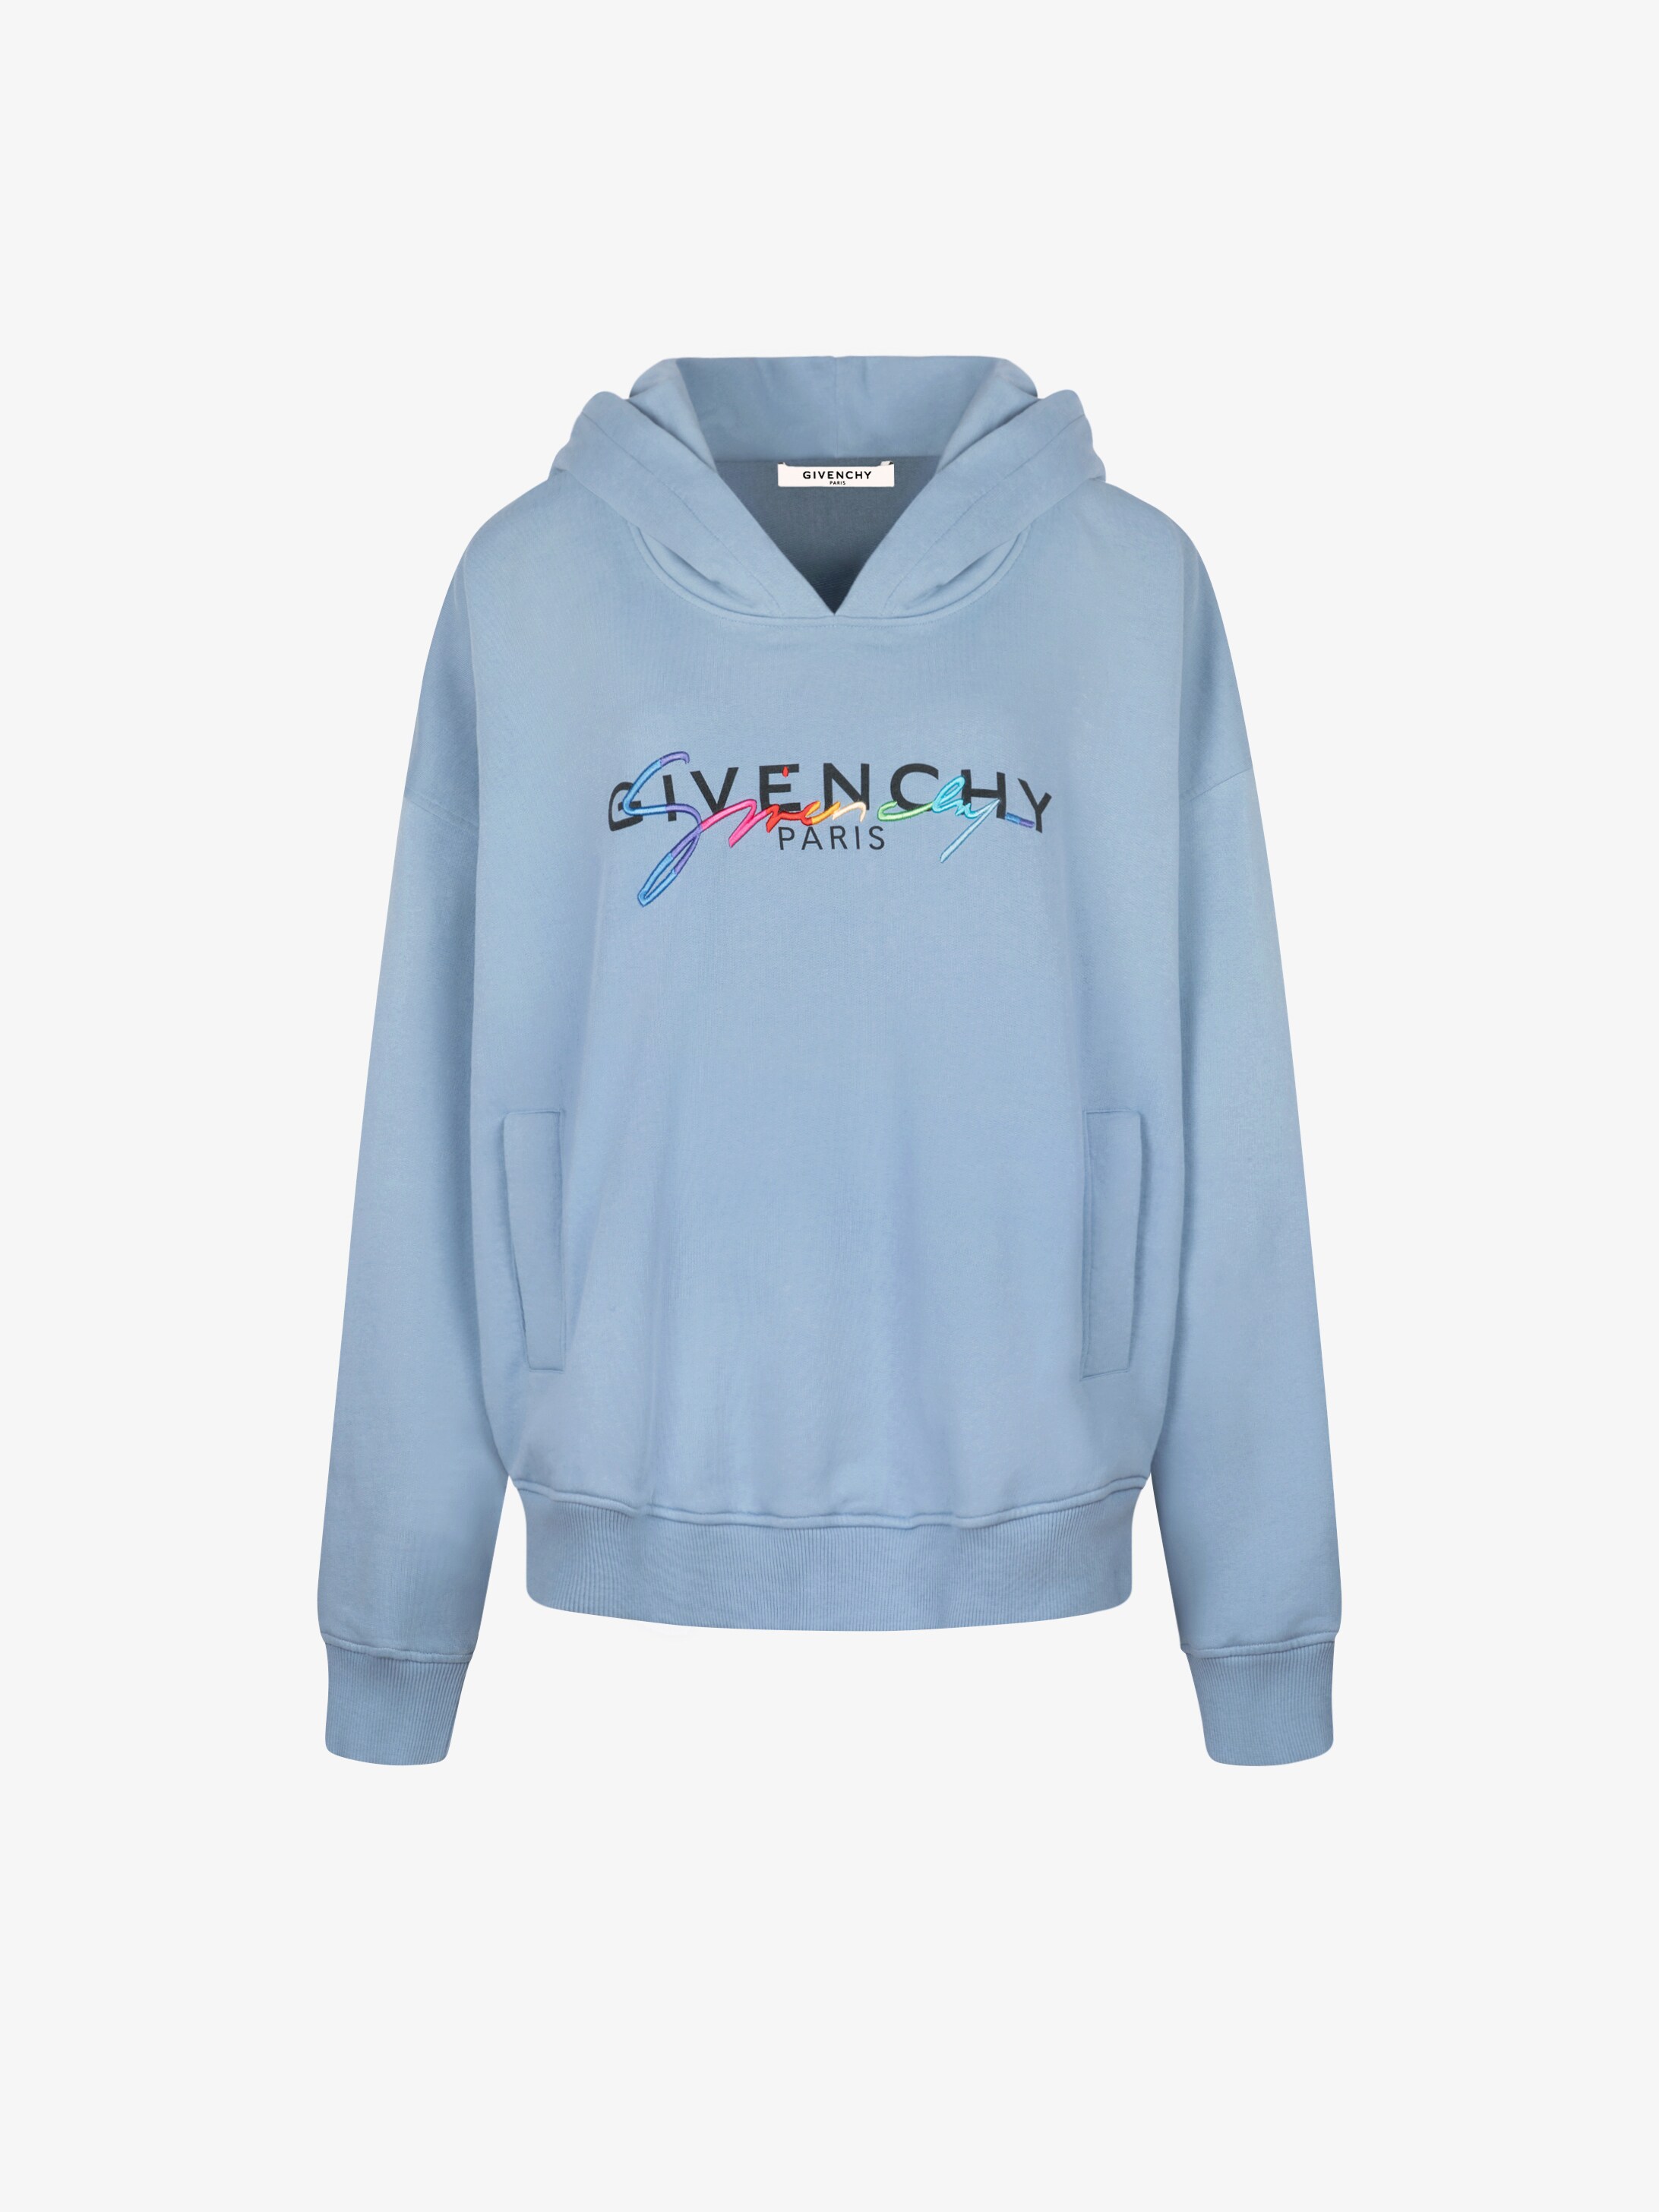 Parity \u003e givenchy hoodie green, Up to 